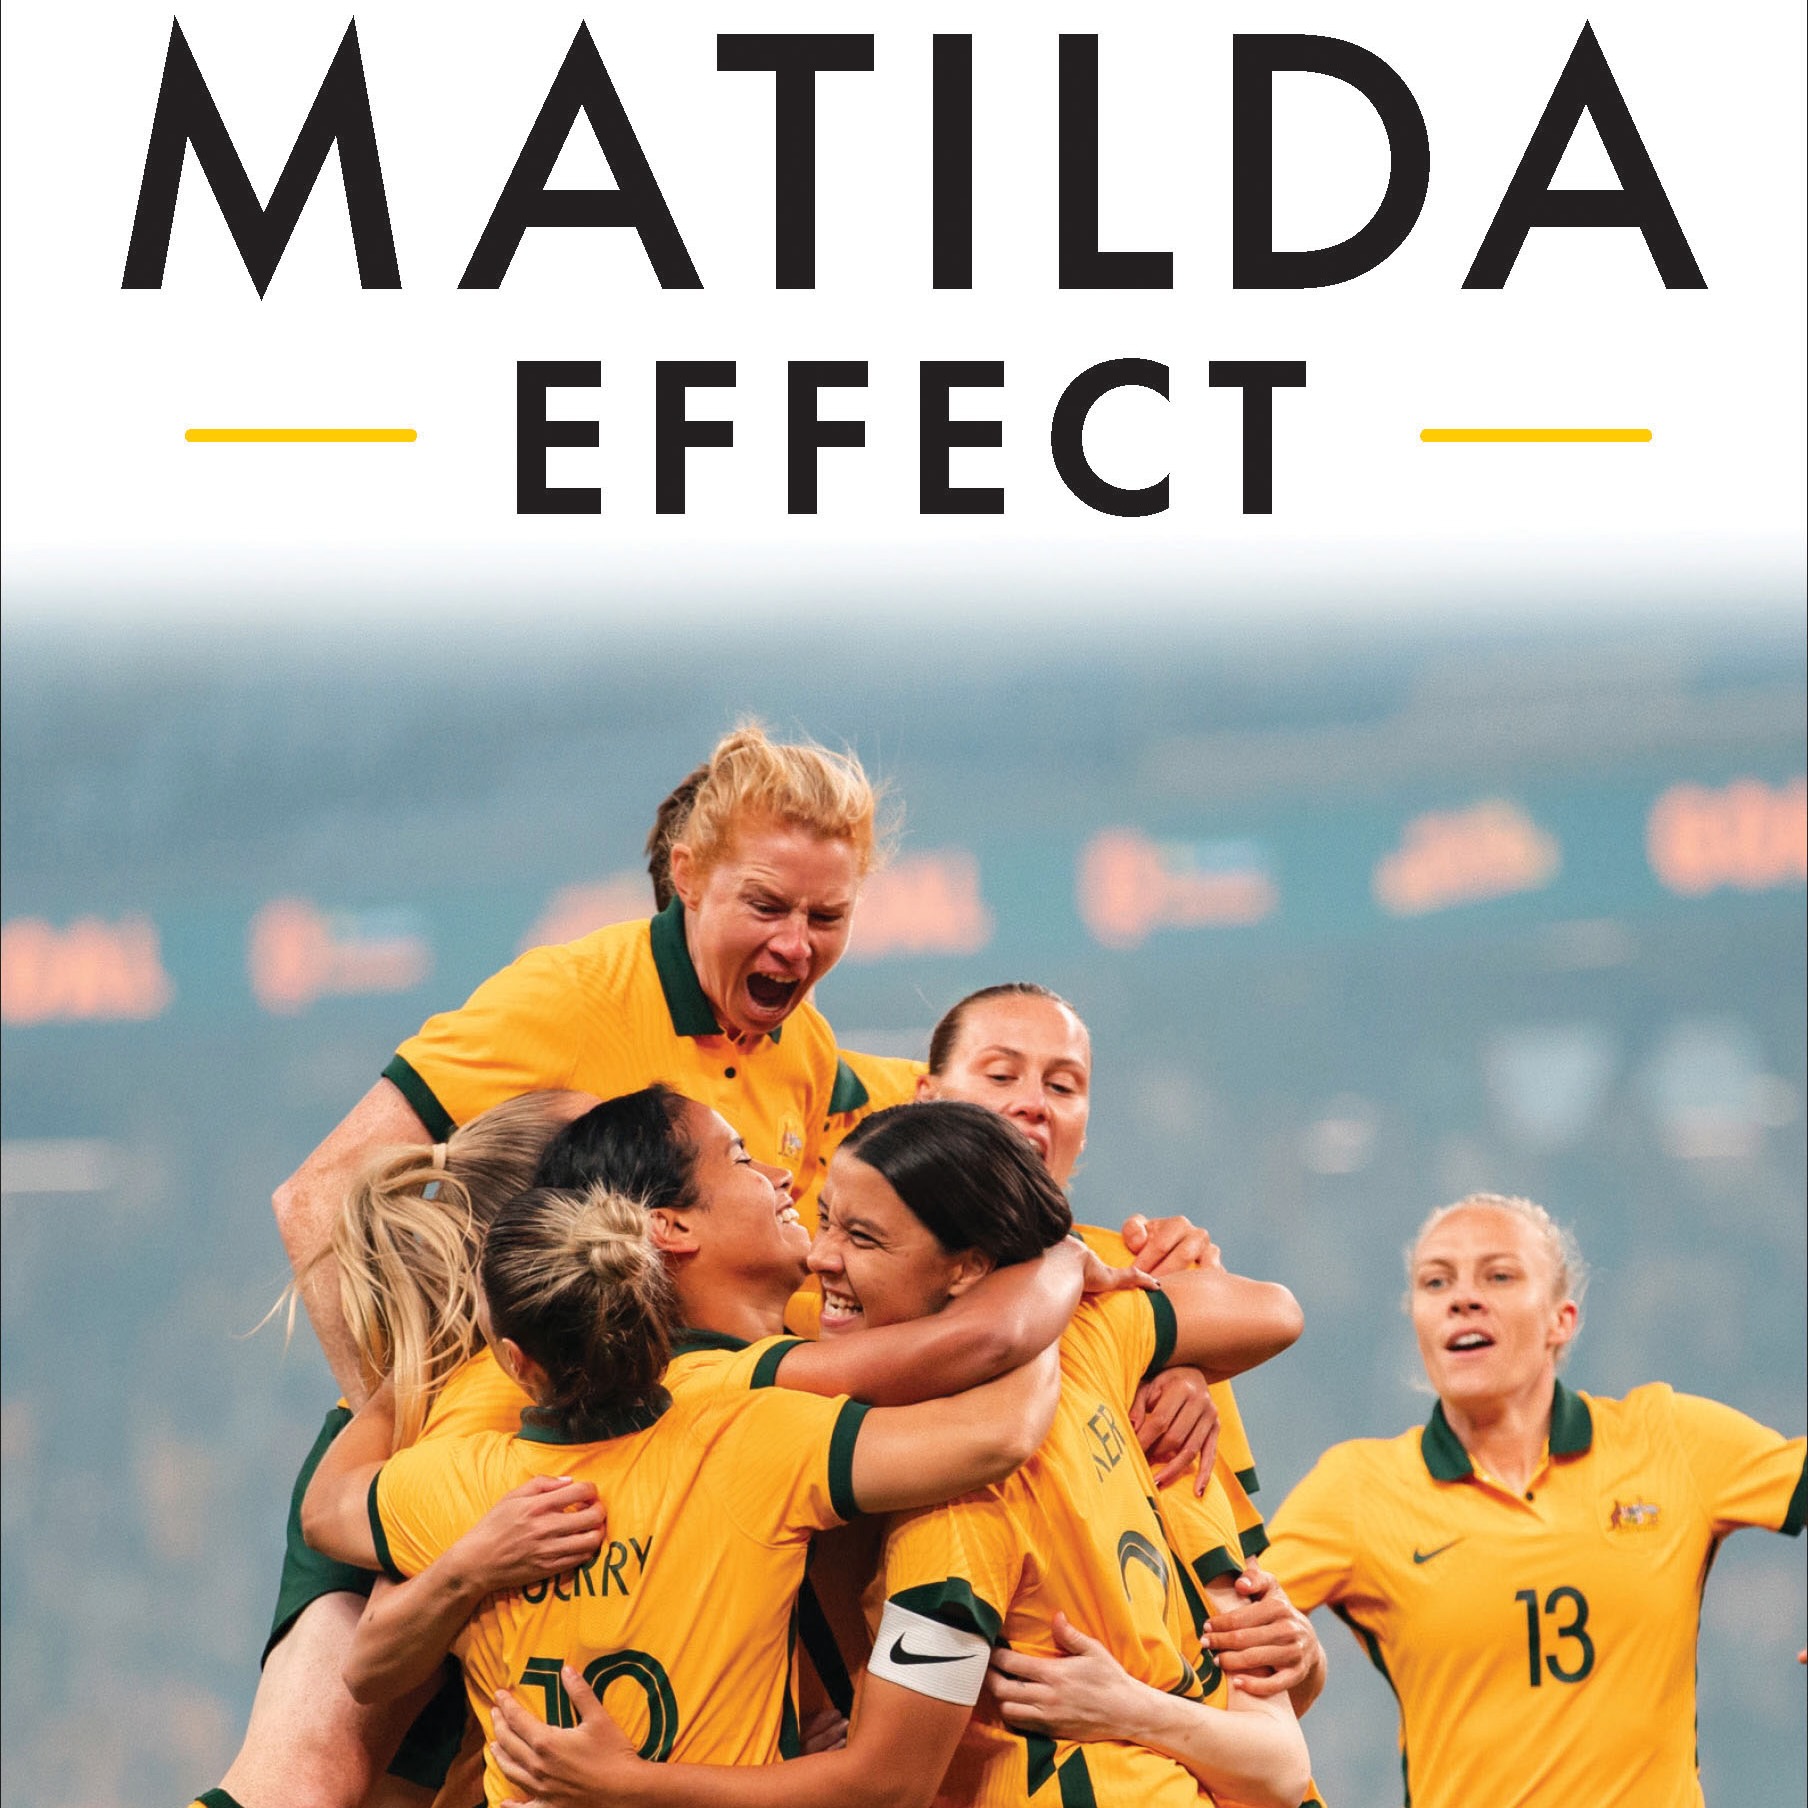 Interview: Fiona Crawford, author of the Matilda Effect